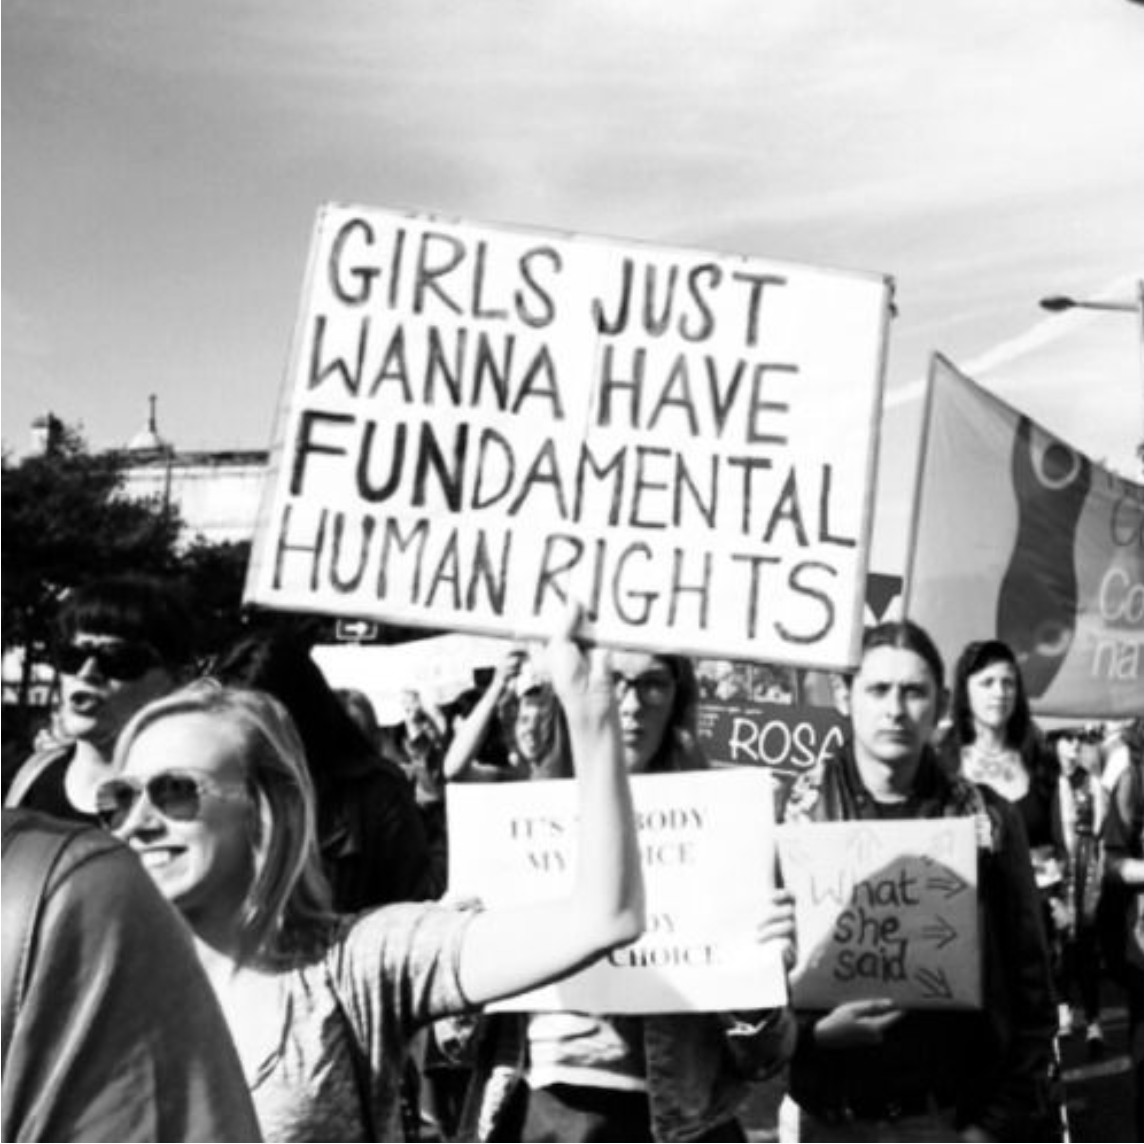 Protest with happy girl having a banner with the sign "girls just wanna have FUndamental rights"